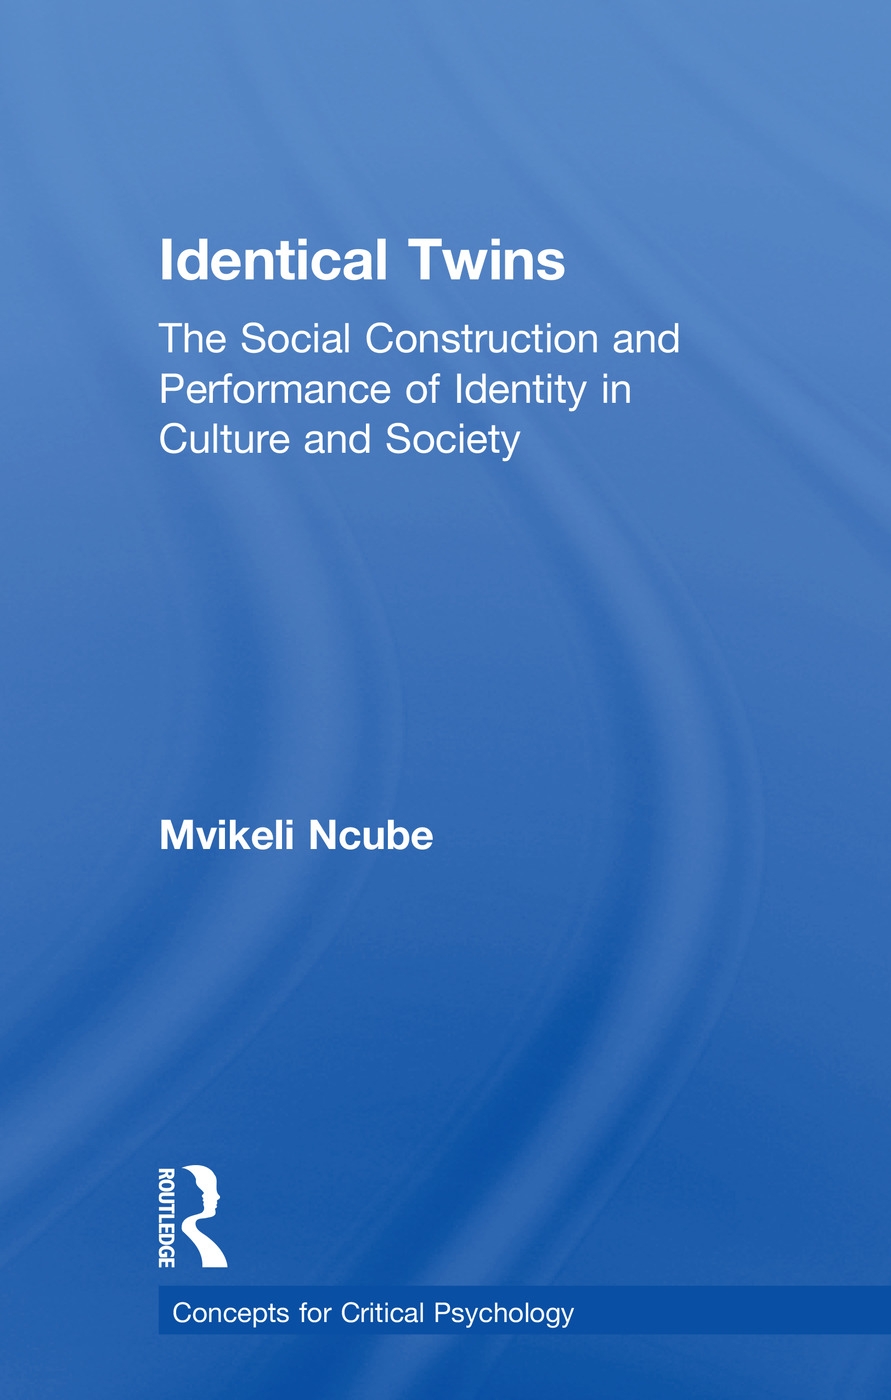 Identical Twins: The Social Construction and Performance of Identity in Culture and Society